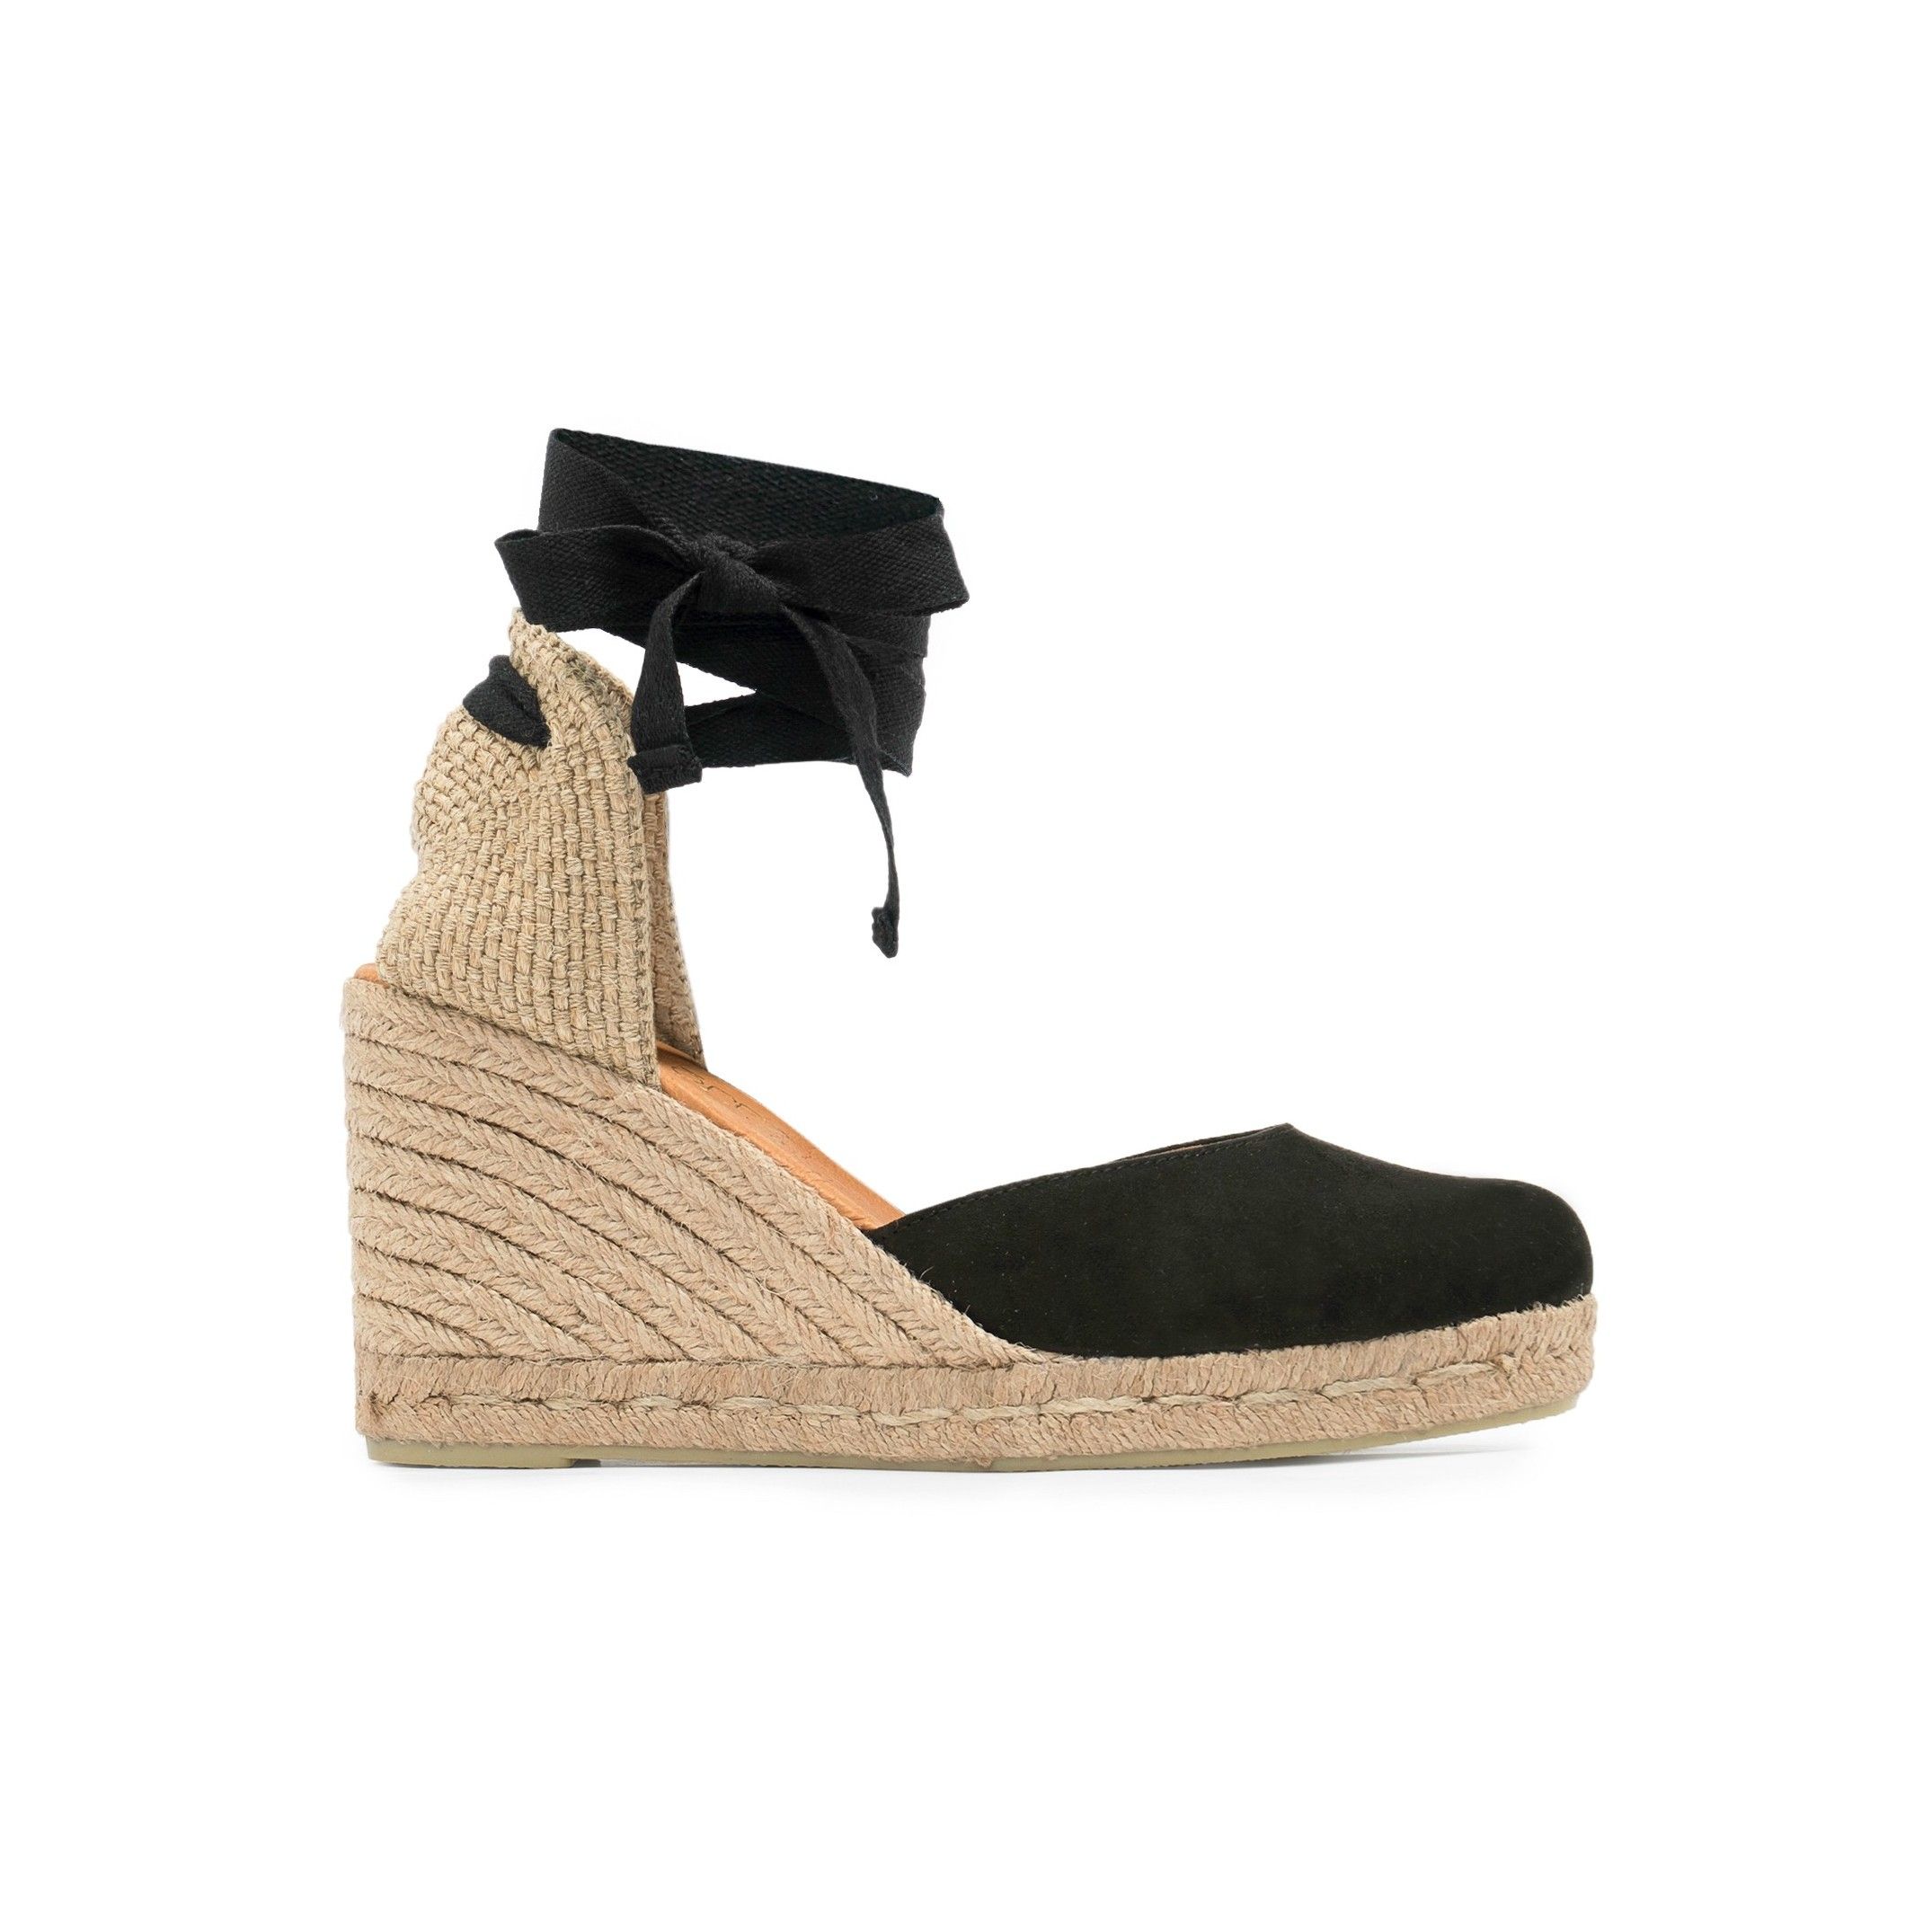 Ankle strap wedge sandals for women. By Eva Lopez Shoes. Ultrasuede fabric. Upper made of textile. Cotton laces closure. Inner lining and insole: pig lining. Padded shoe sole: 0.3 cm. Sole material: synthetic. Heel height: 8 cm. Platform: 2 cm Designed and manufactured in Spain.